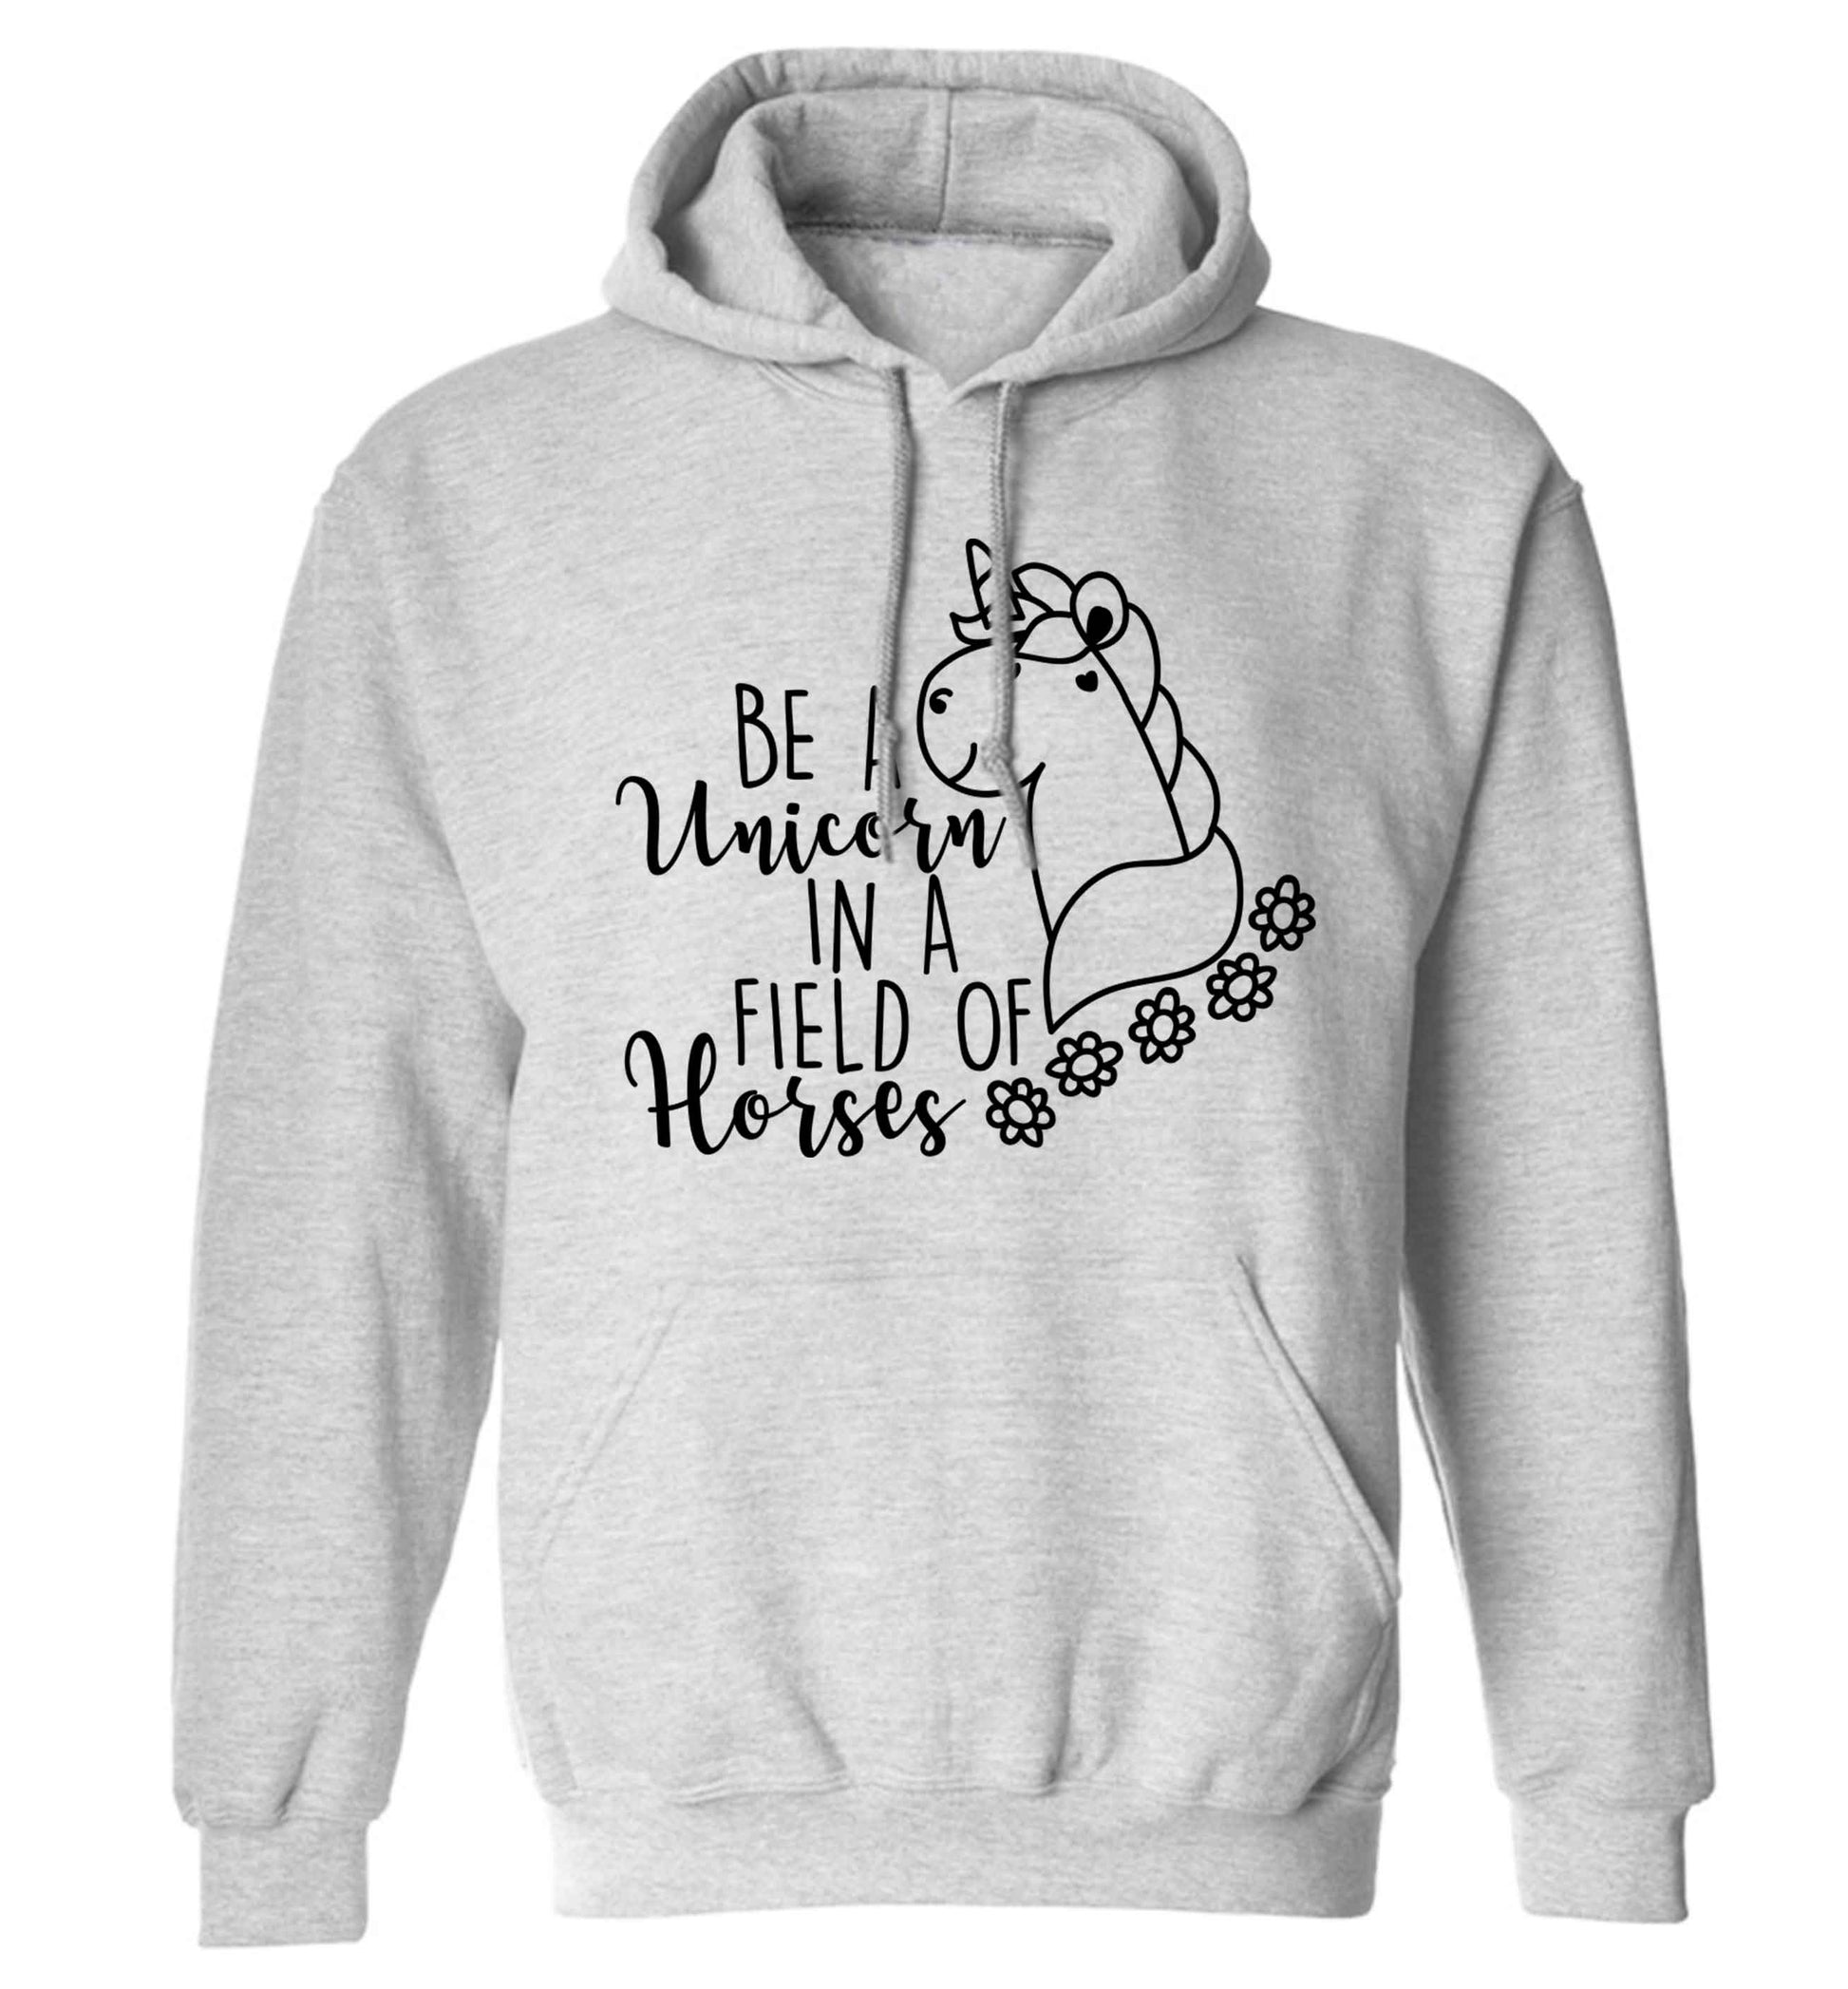 Be a unicorn in a field of horses adults unisex grey hoodie 2XL